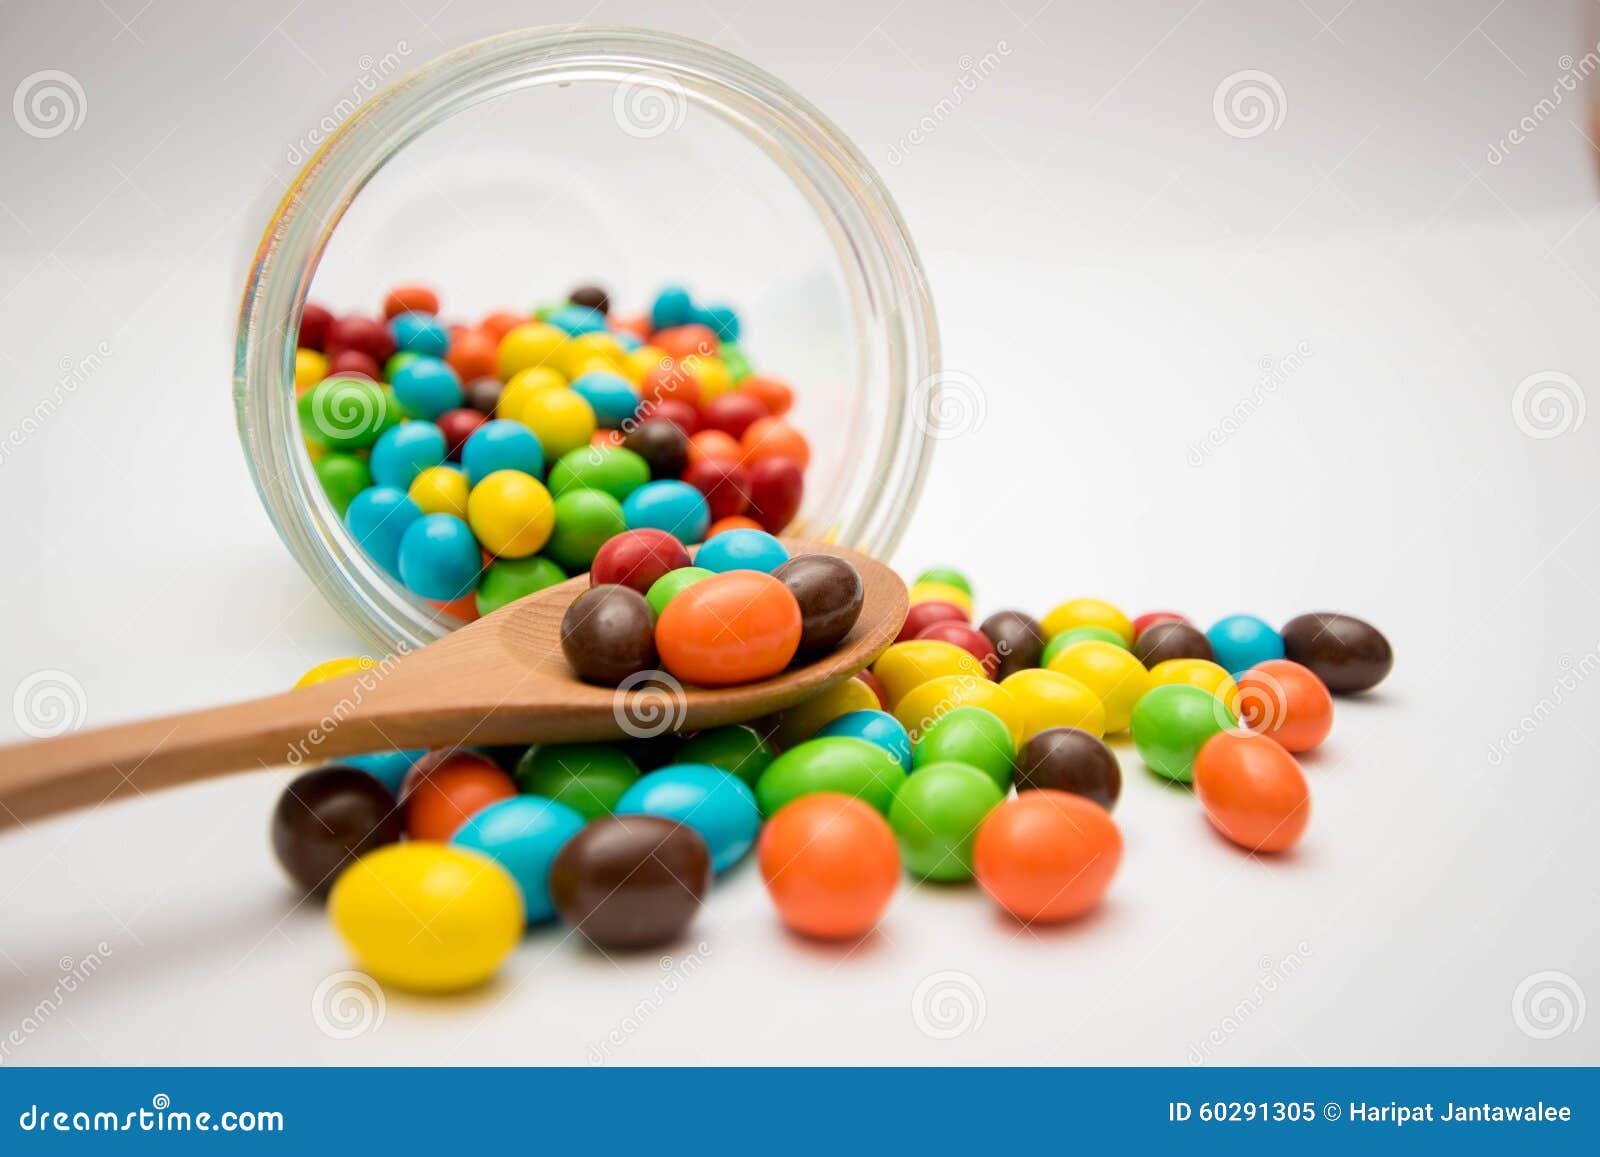 Candy mix stock image. Image of glass, colorful, growth - 60291305